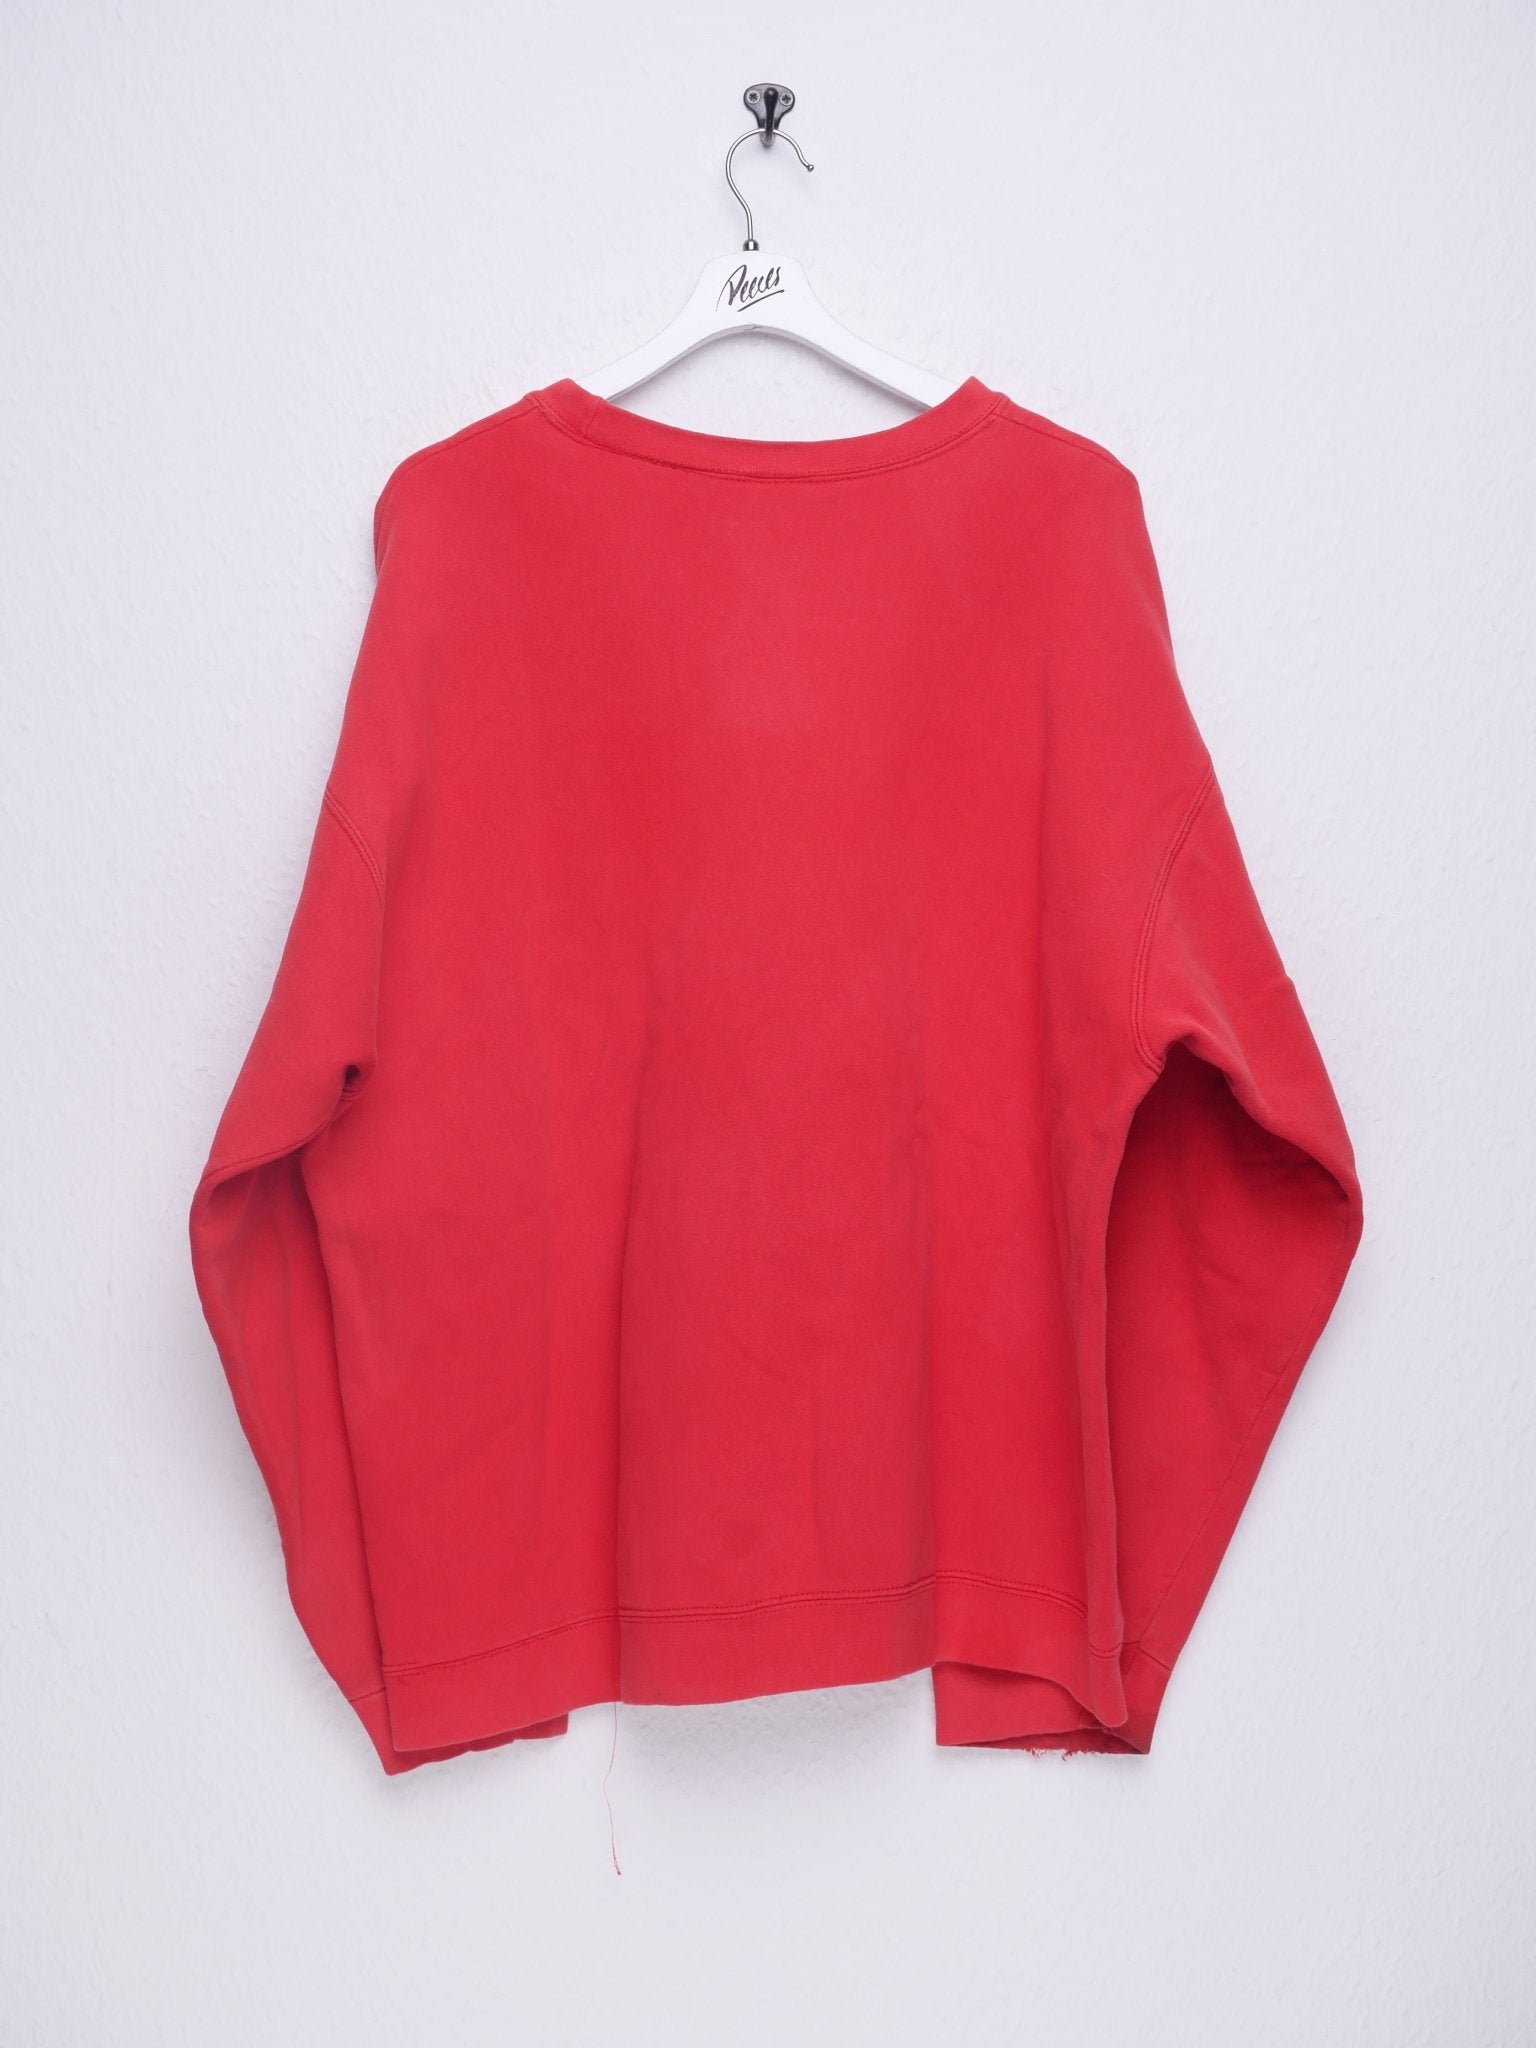 Shoppers Supply embroidered Spellout red Sweater - Peeces